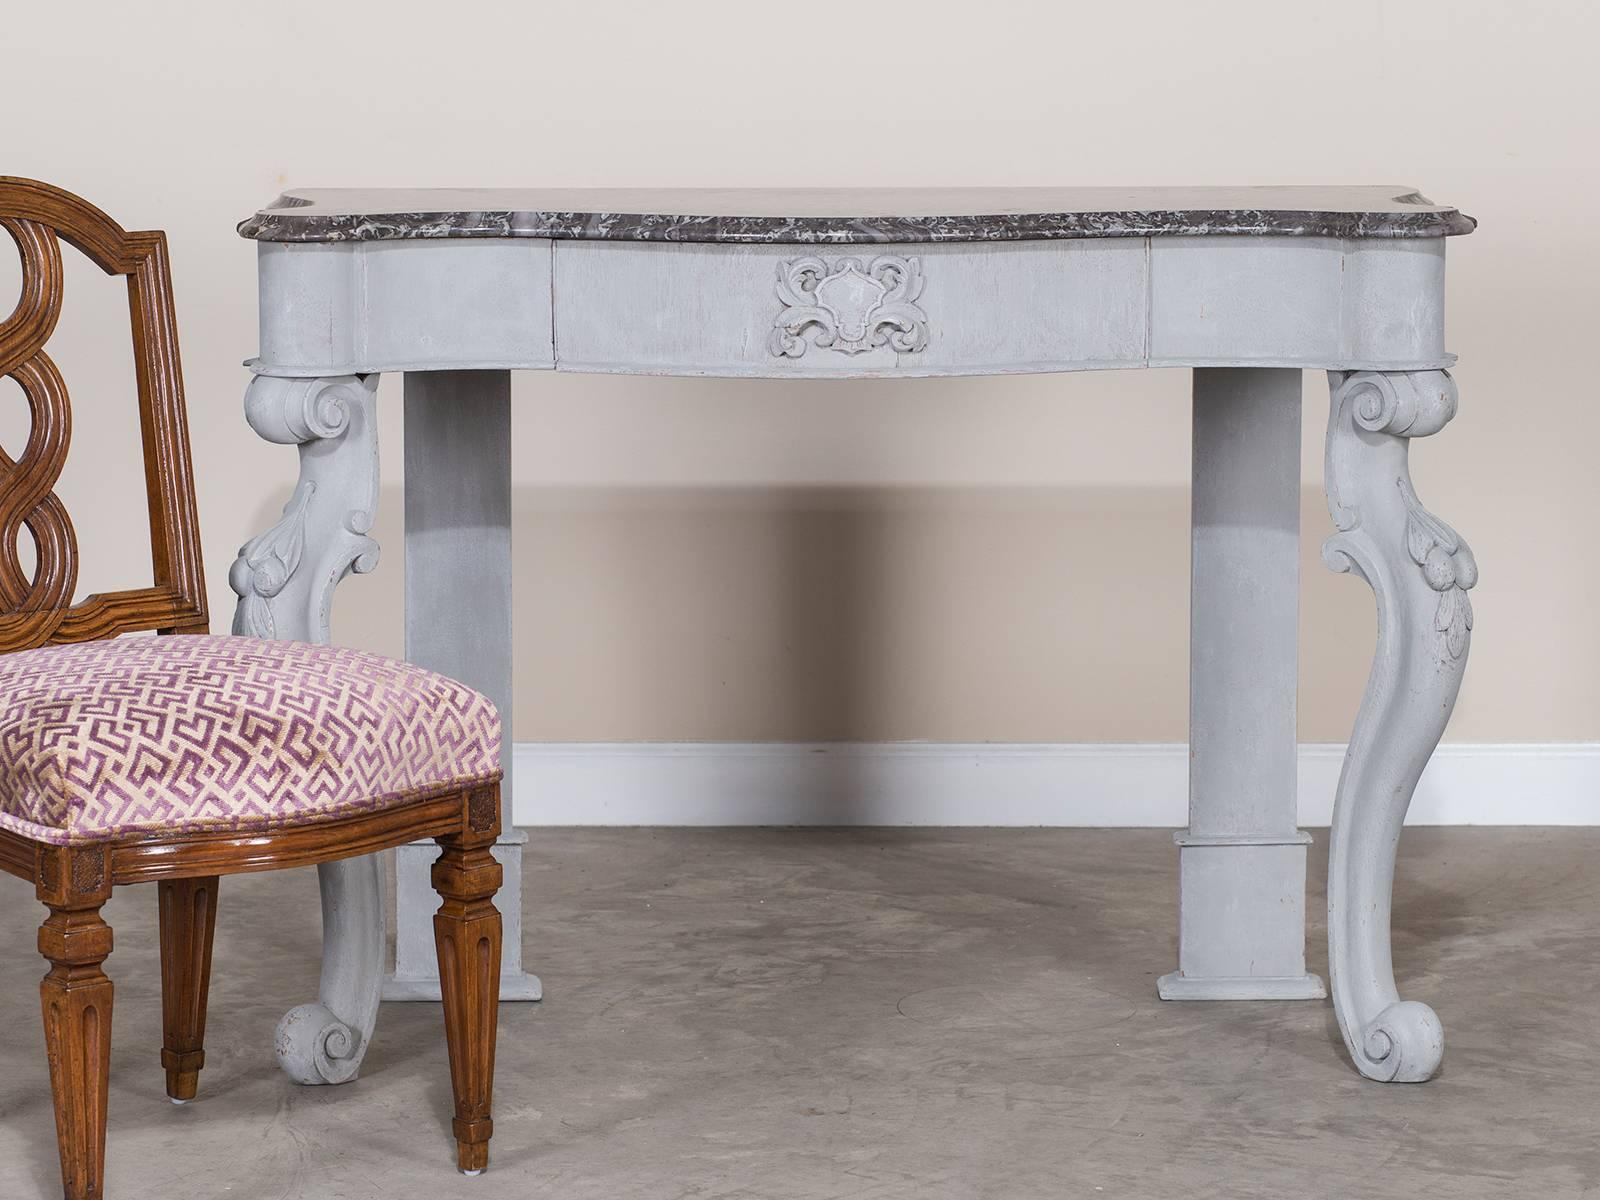 Receive our new selections direct from 1stdibs by email each week. Please click Follow Dealer below and see them first!

An English painted oak William Kent style console table with a black marble top, circa 1850. This beautiful console table